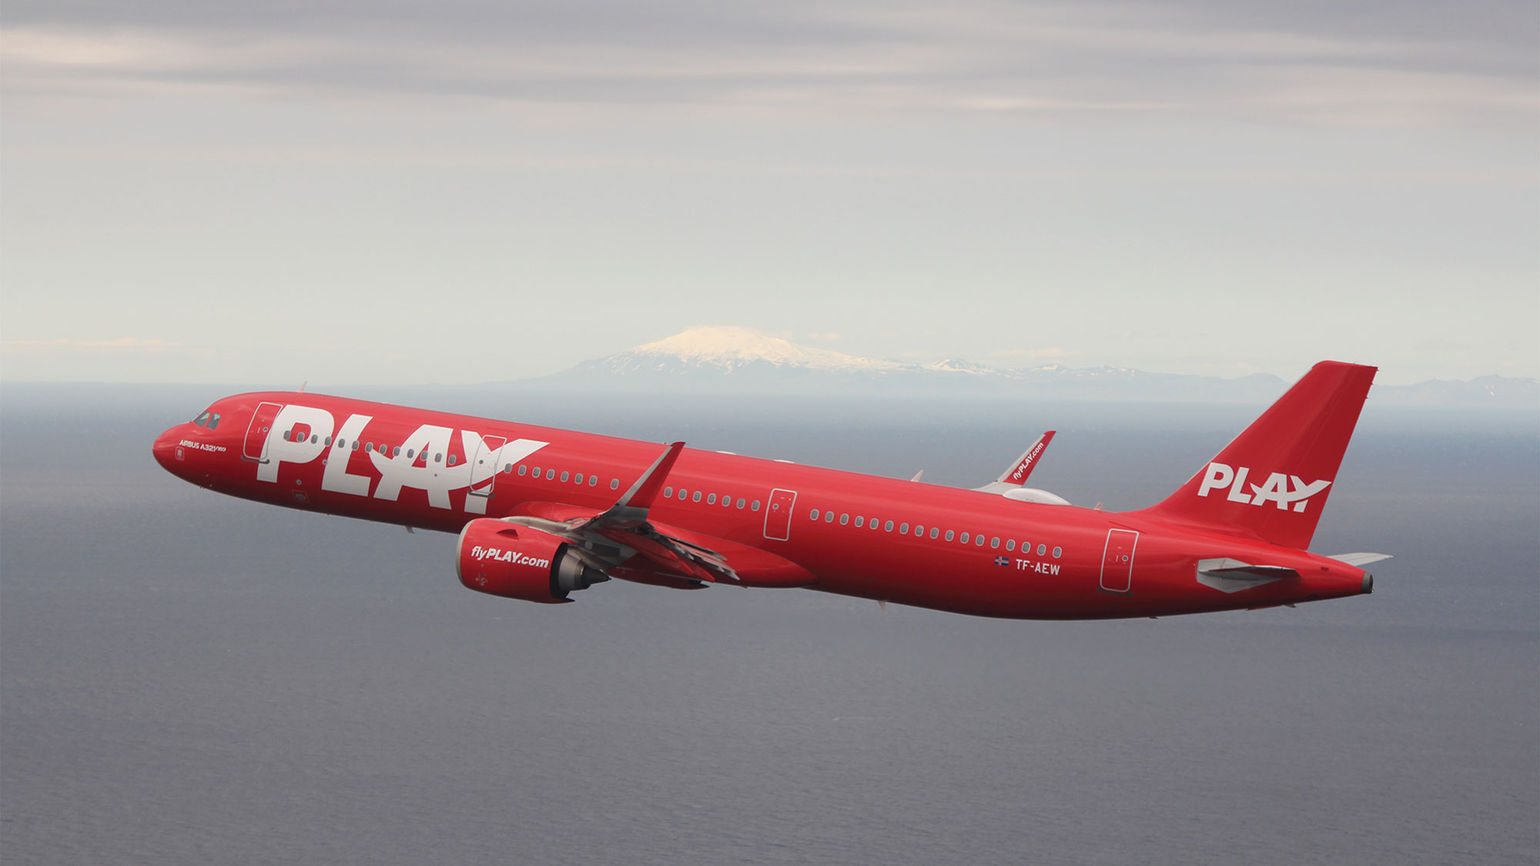 New Iceland-based airline heats up transatlantic competition